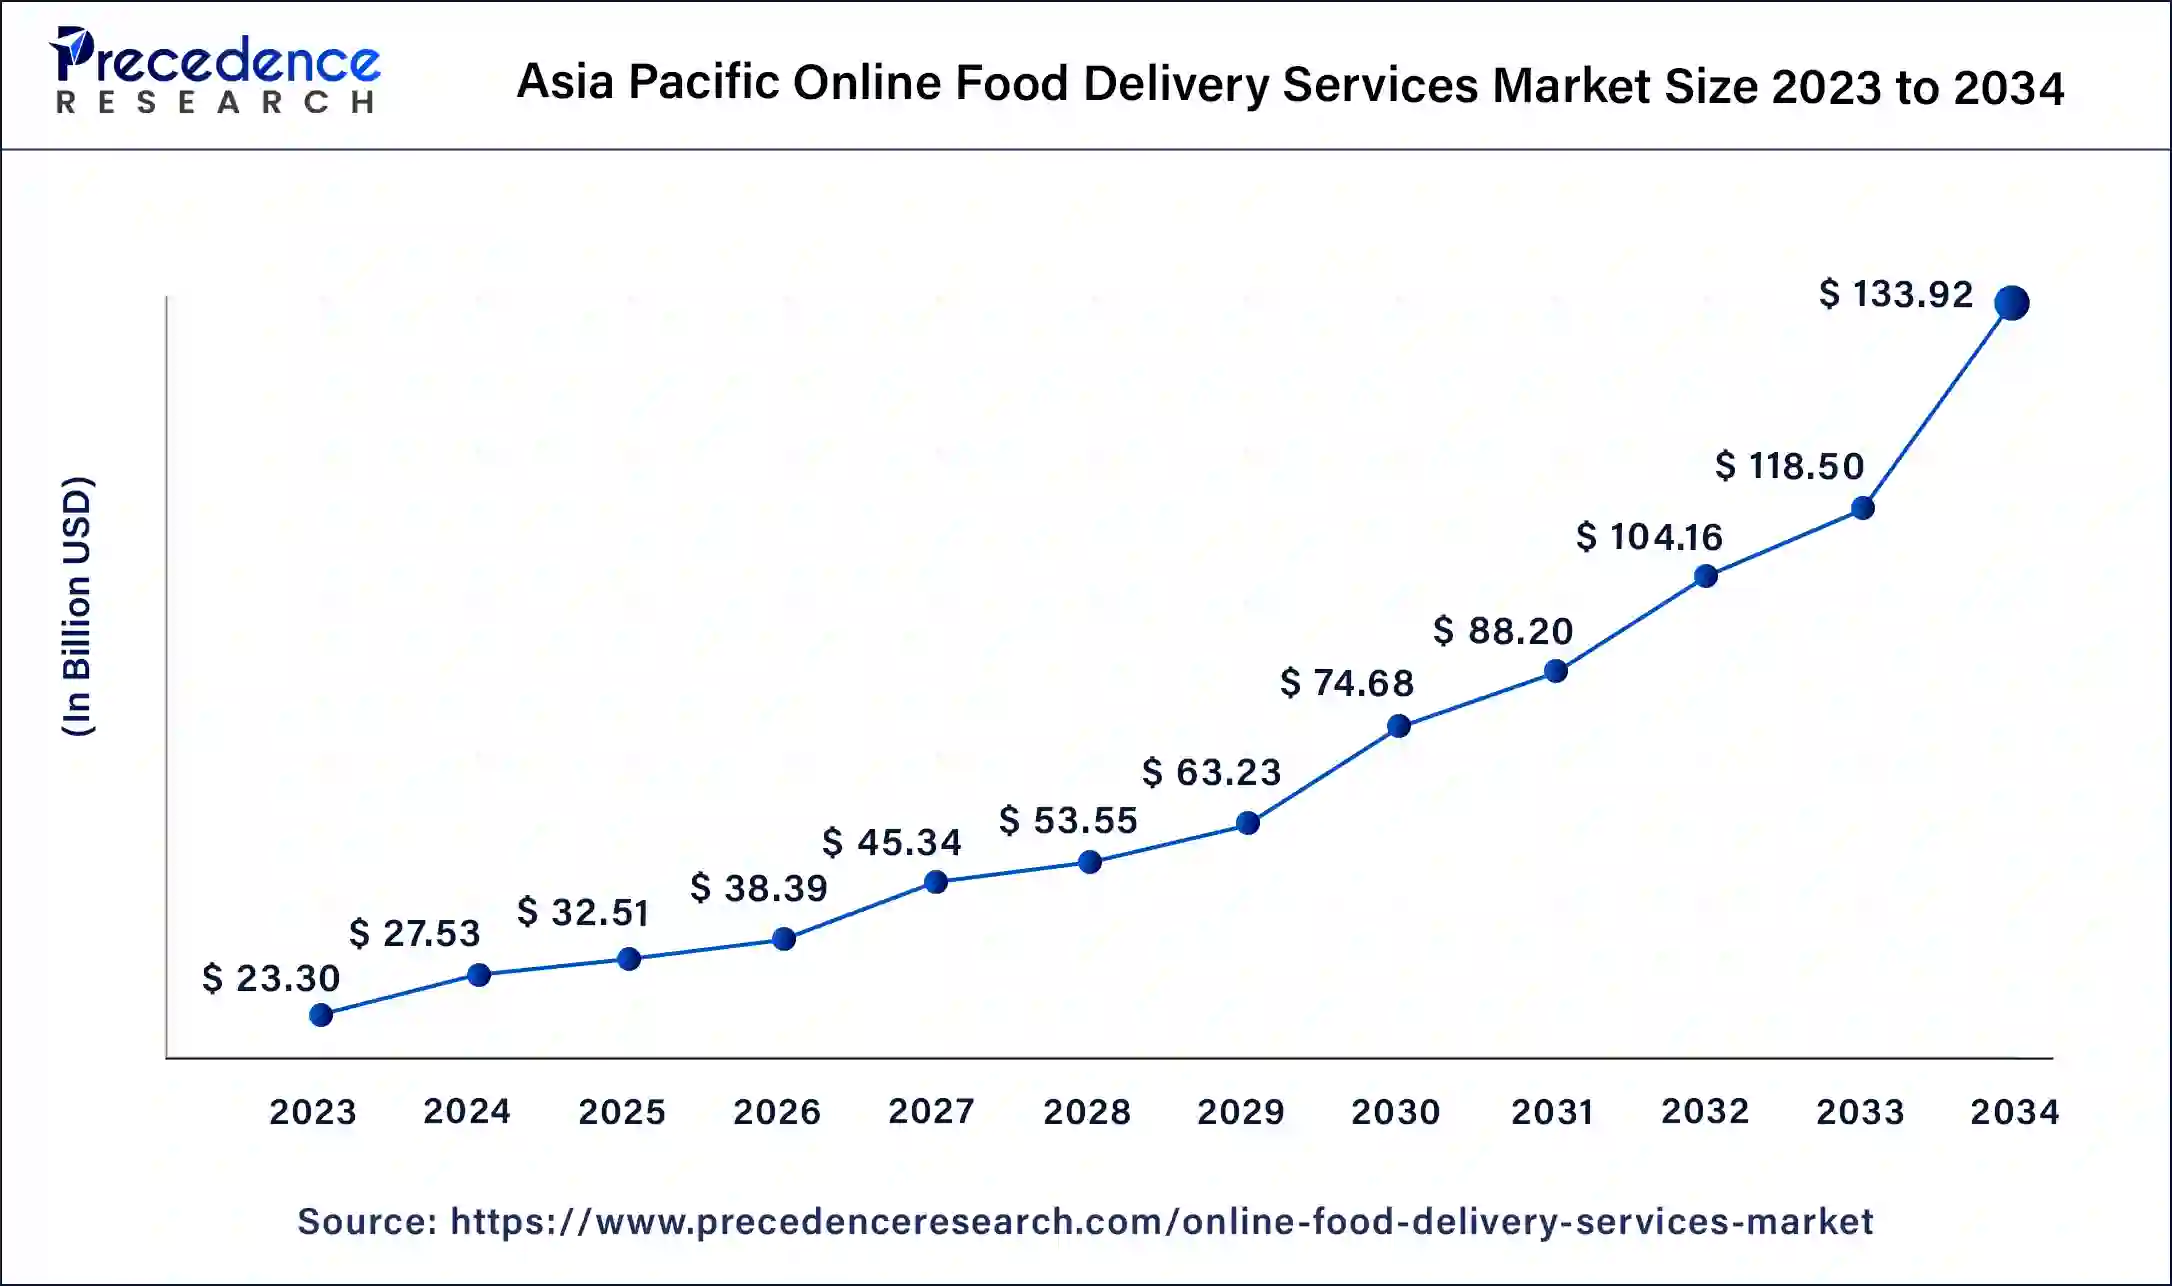 Asia Pacific Online Food Delivery Services Market Size 2024 to 2034